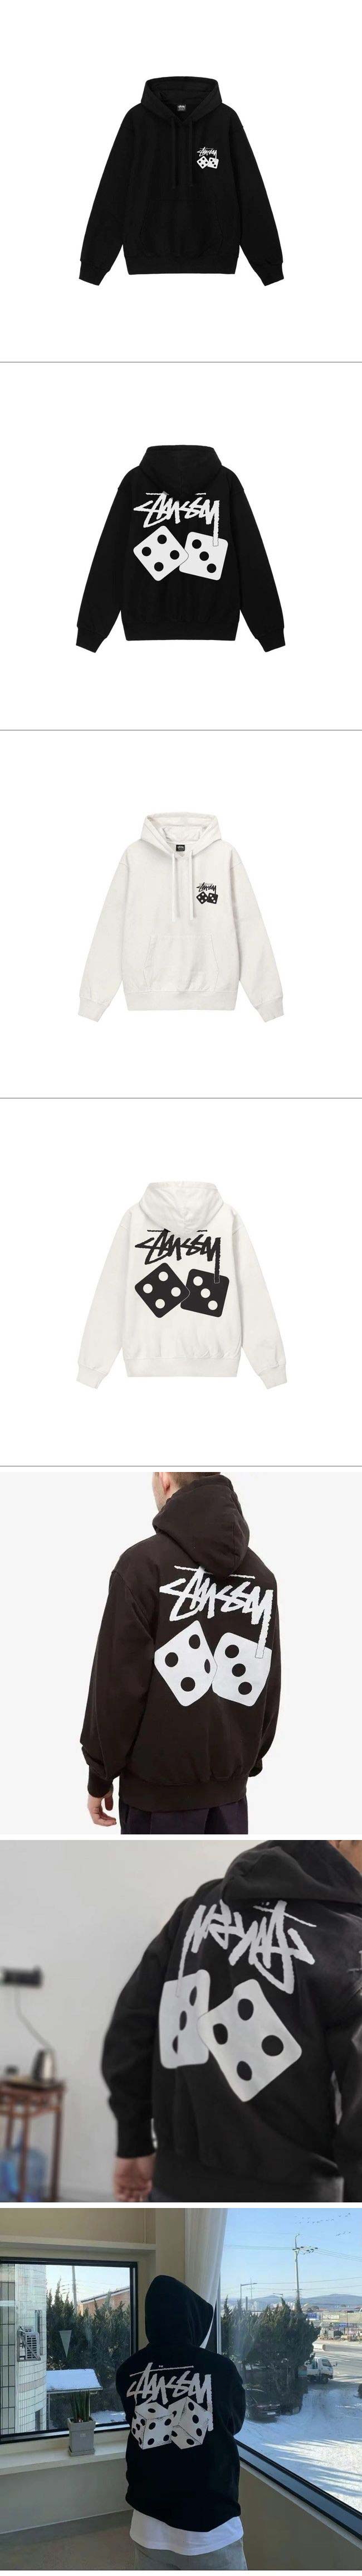 Stussy 23SS Diced Out Parker ステューシー ダイス アウト パーカー